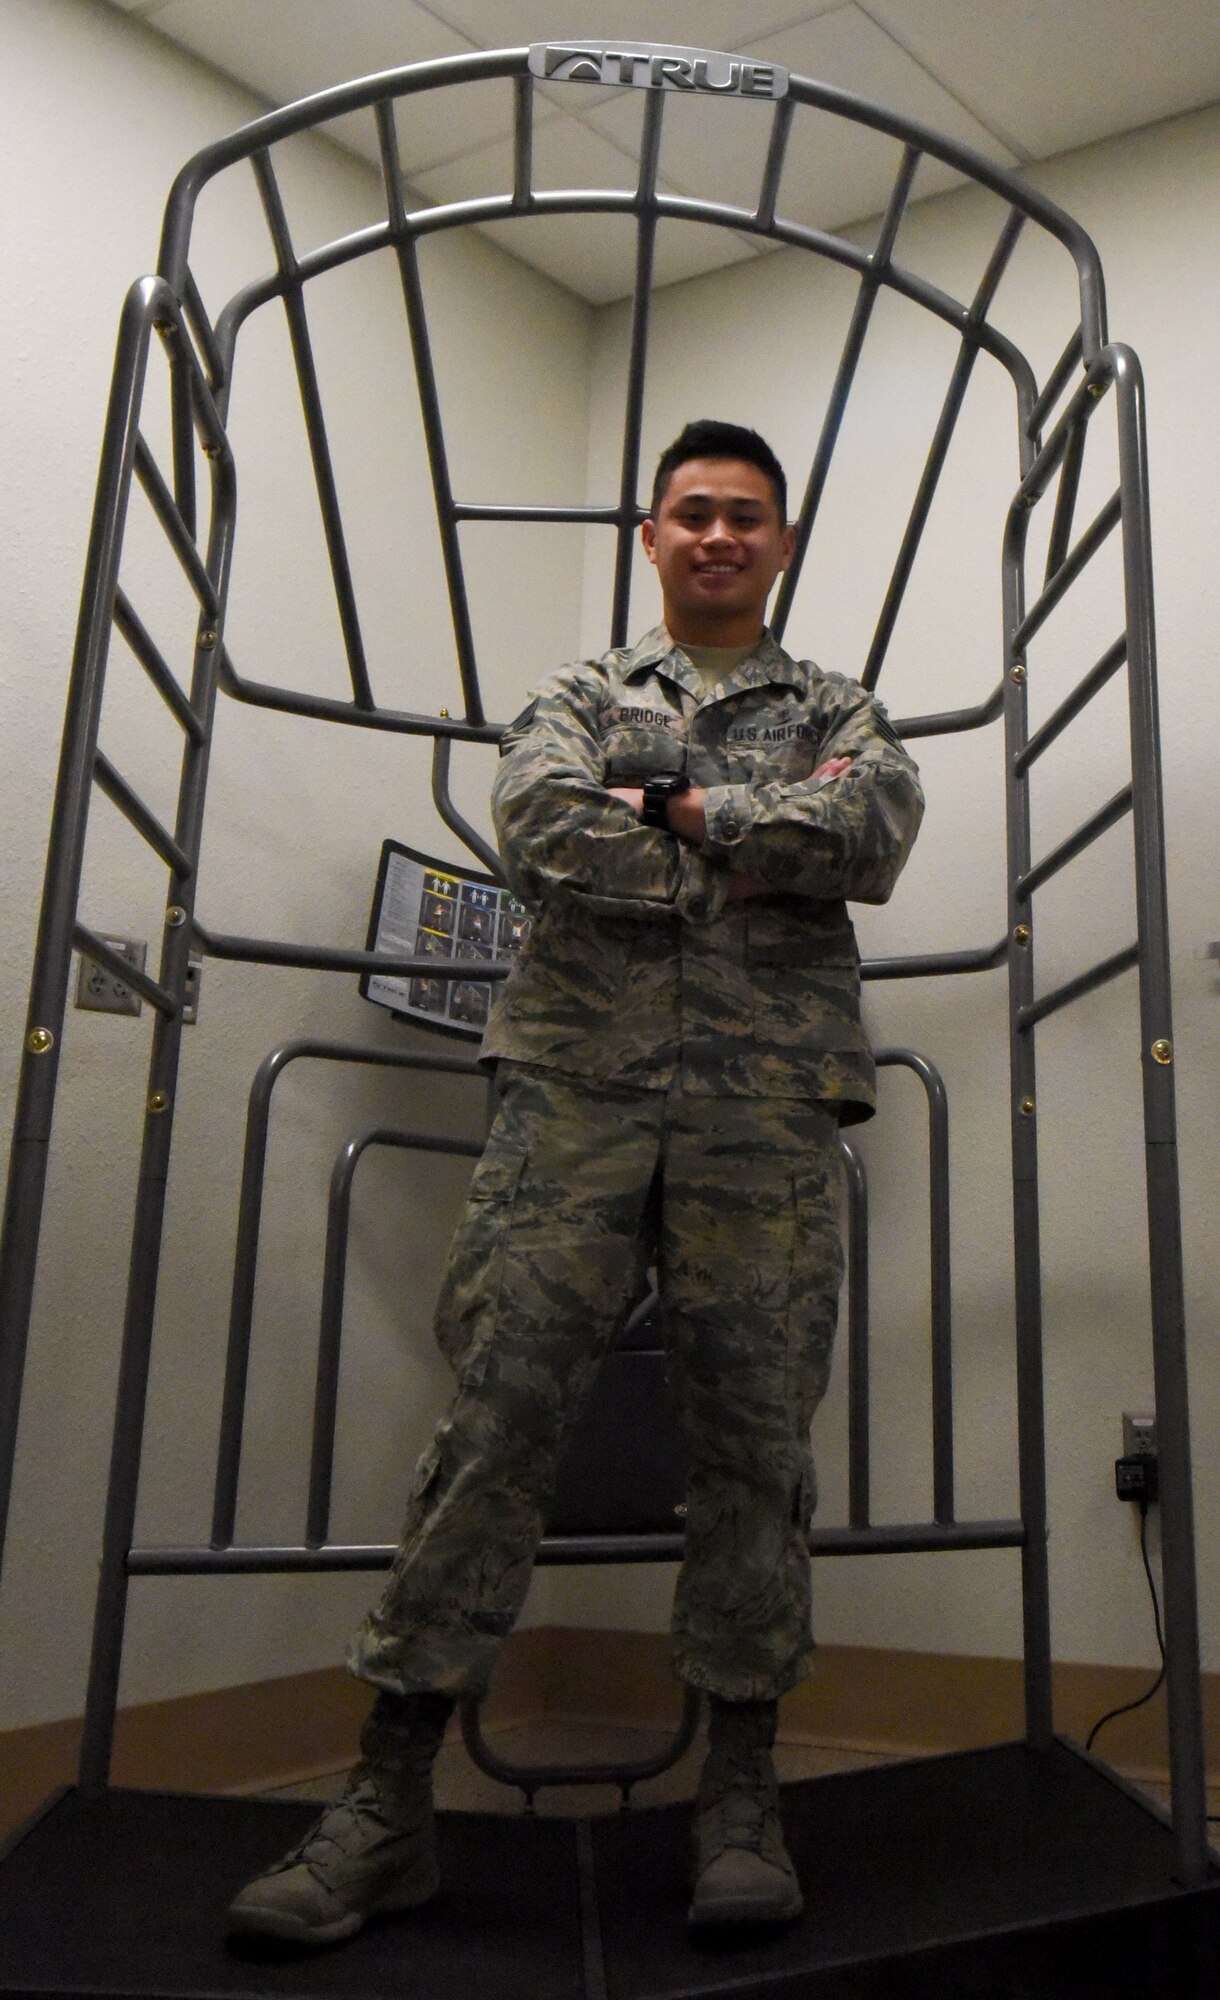 Senior Airman Rigel Bridge, 90th Medical Group physical medicine journeyman, poses for a photo on F.E. Warren Air Force Base, Wyo., Nov. 9, 2017. Bridge provides physical therapy assistance to wounded service members.